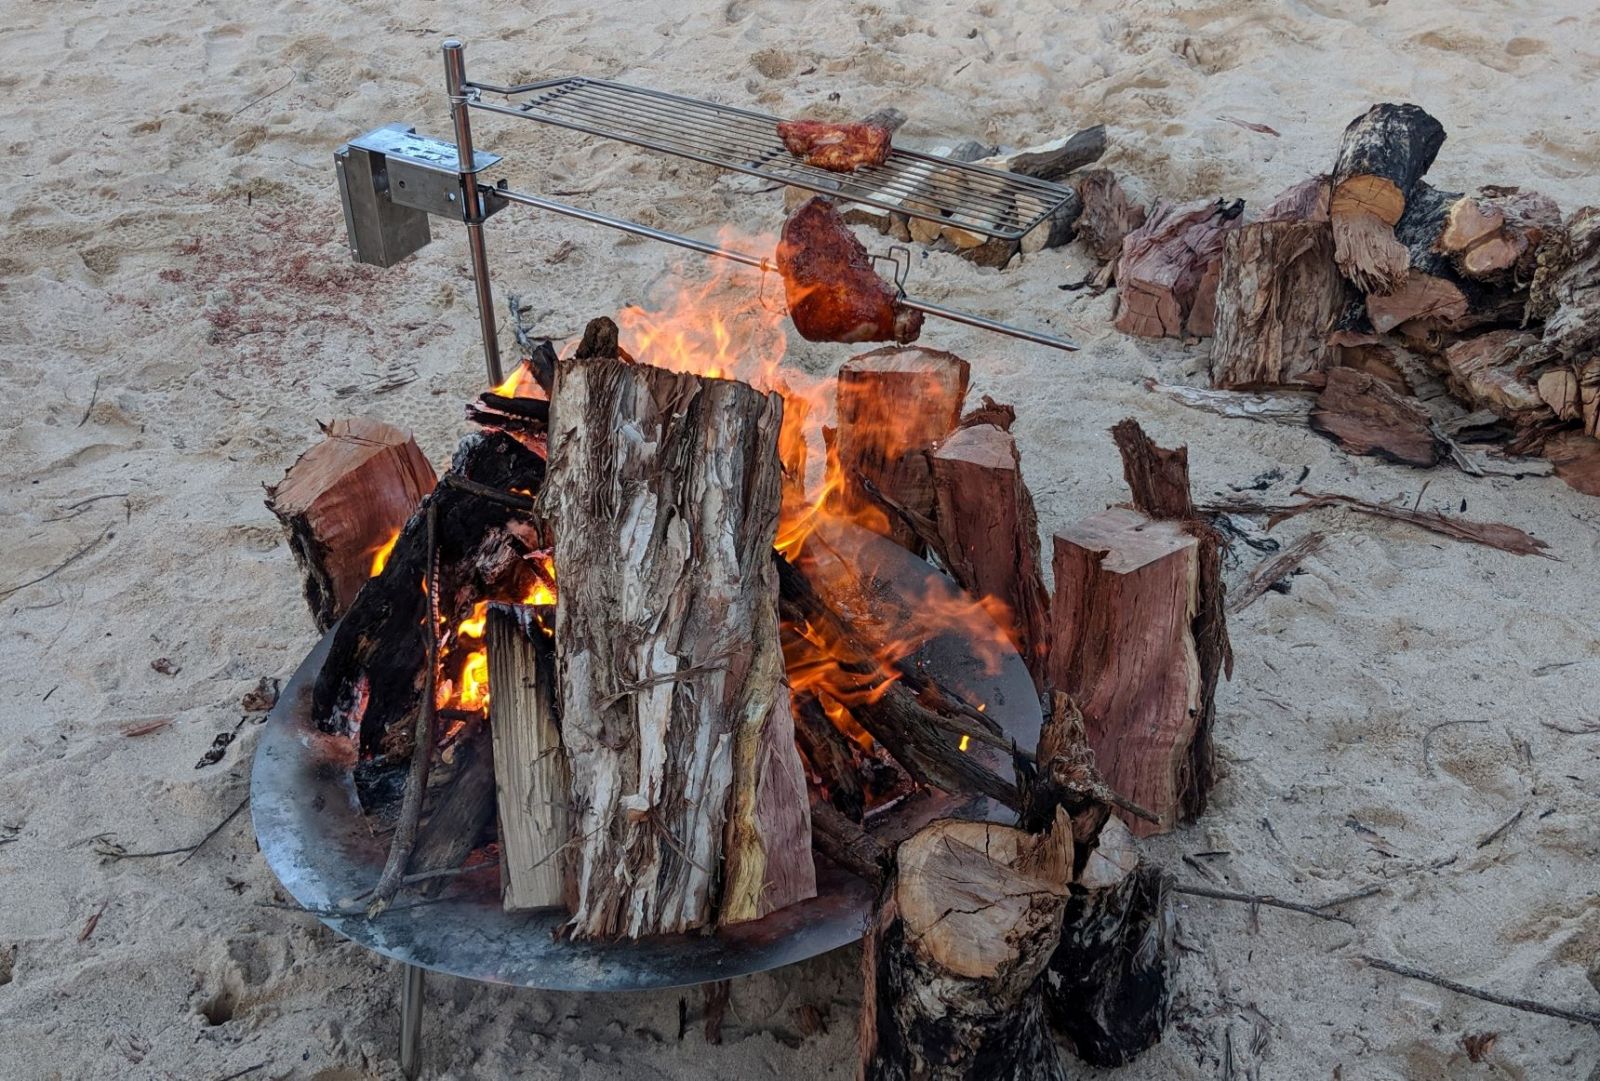 This image show the Auspit Portable camping grill being used along with the auspit rotisserie above an open camp fire